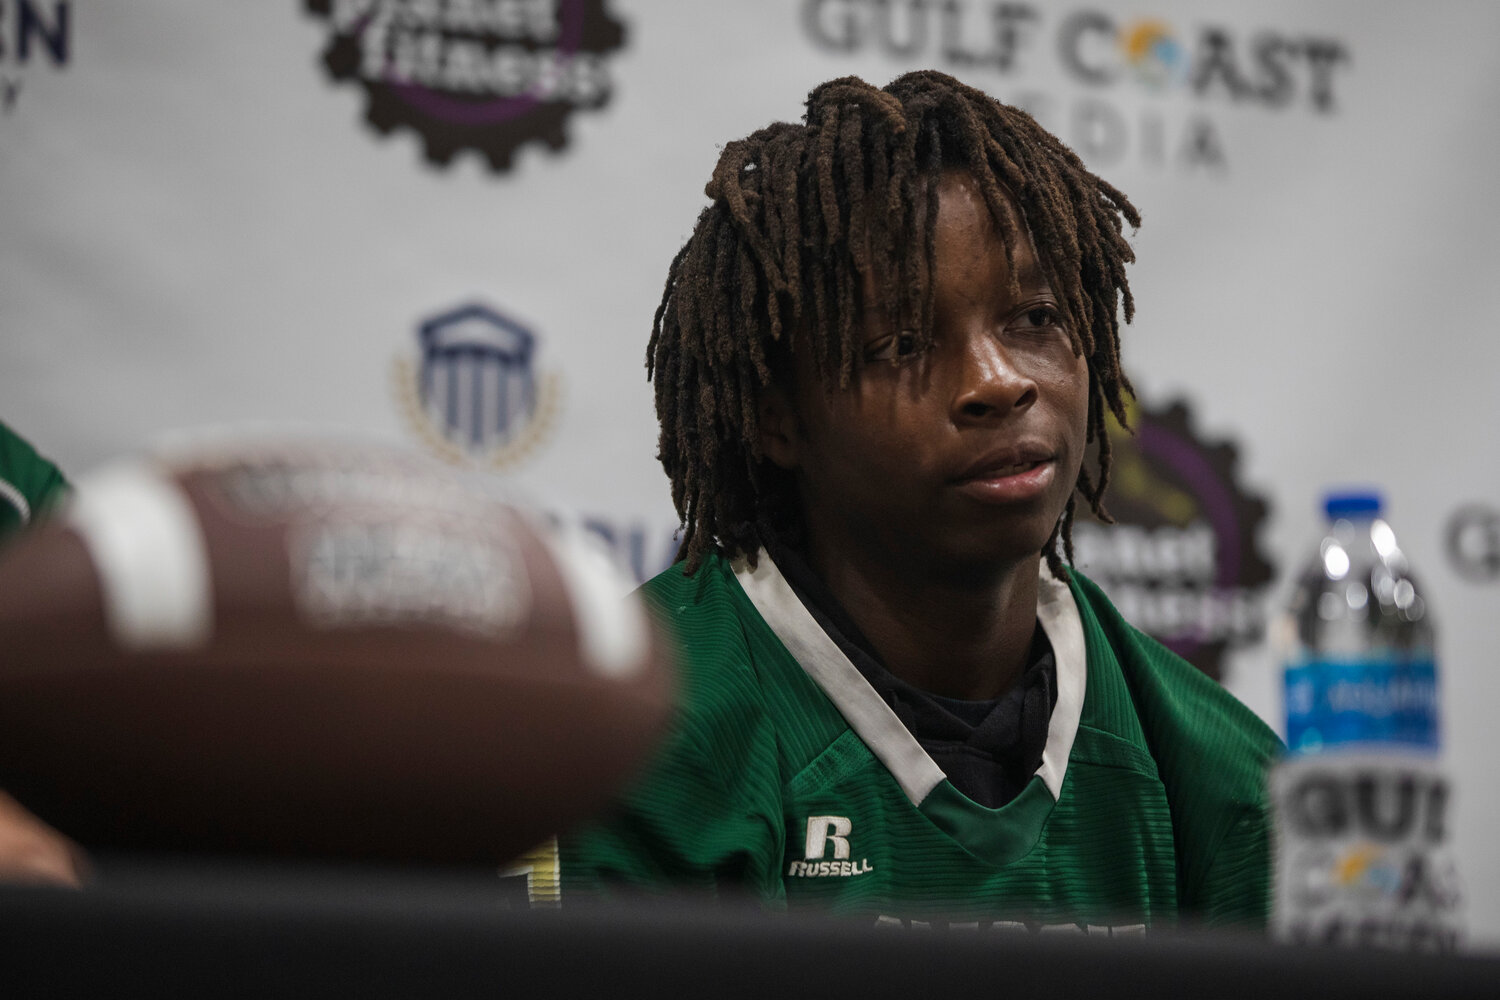 Snook Christian senior Roshad Harris meets with the press at the Orange Beach Event Center as part of Gulf Coast Media Day on Thursday, July 27. Harris is set to take over at quarterback this season after being used as a weapon all over the offense last season.